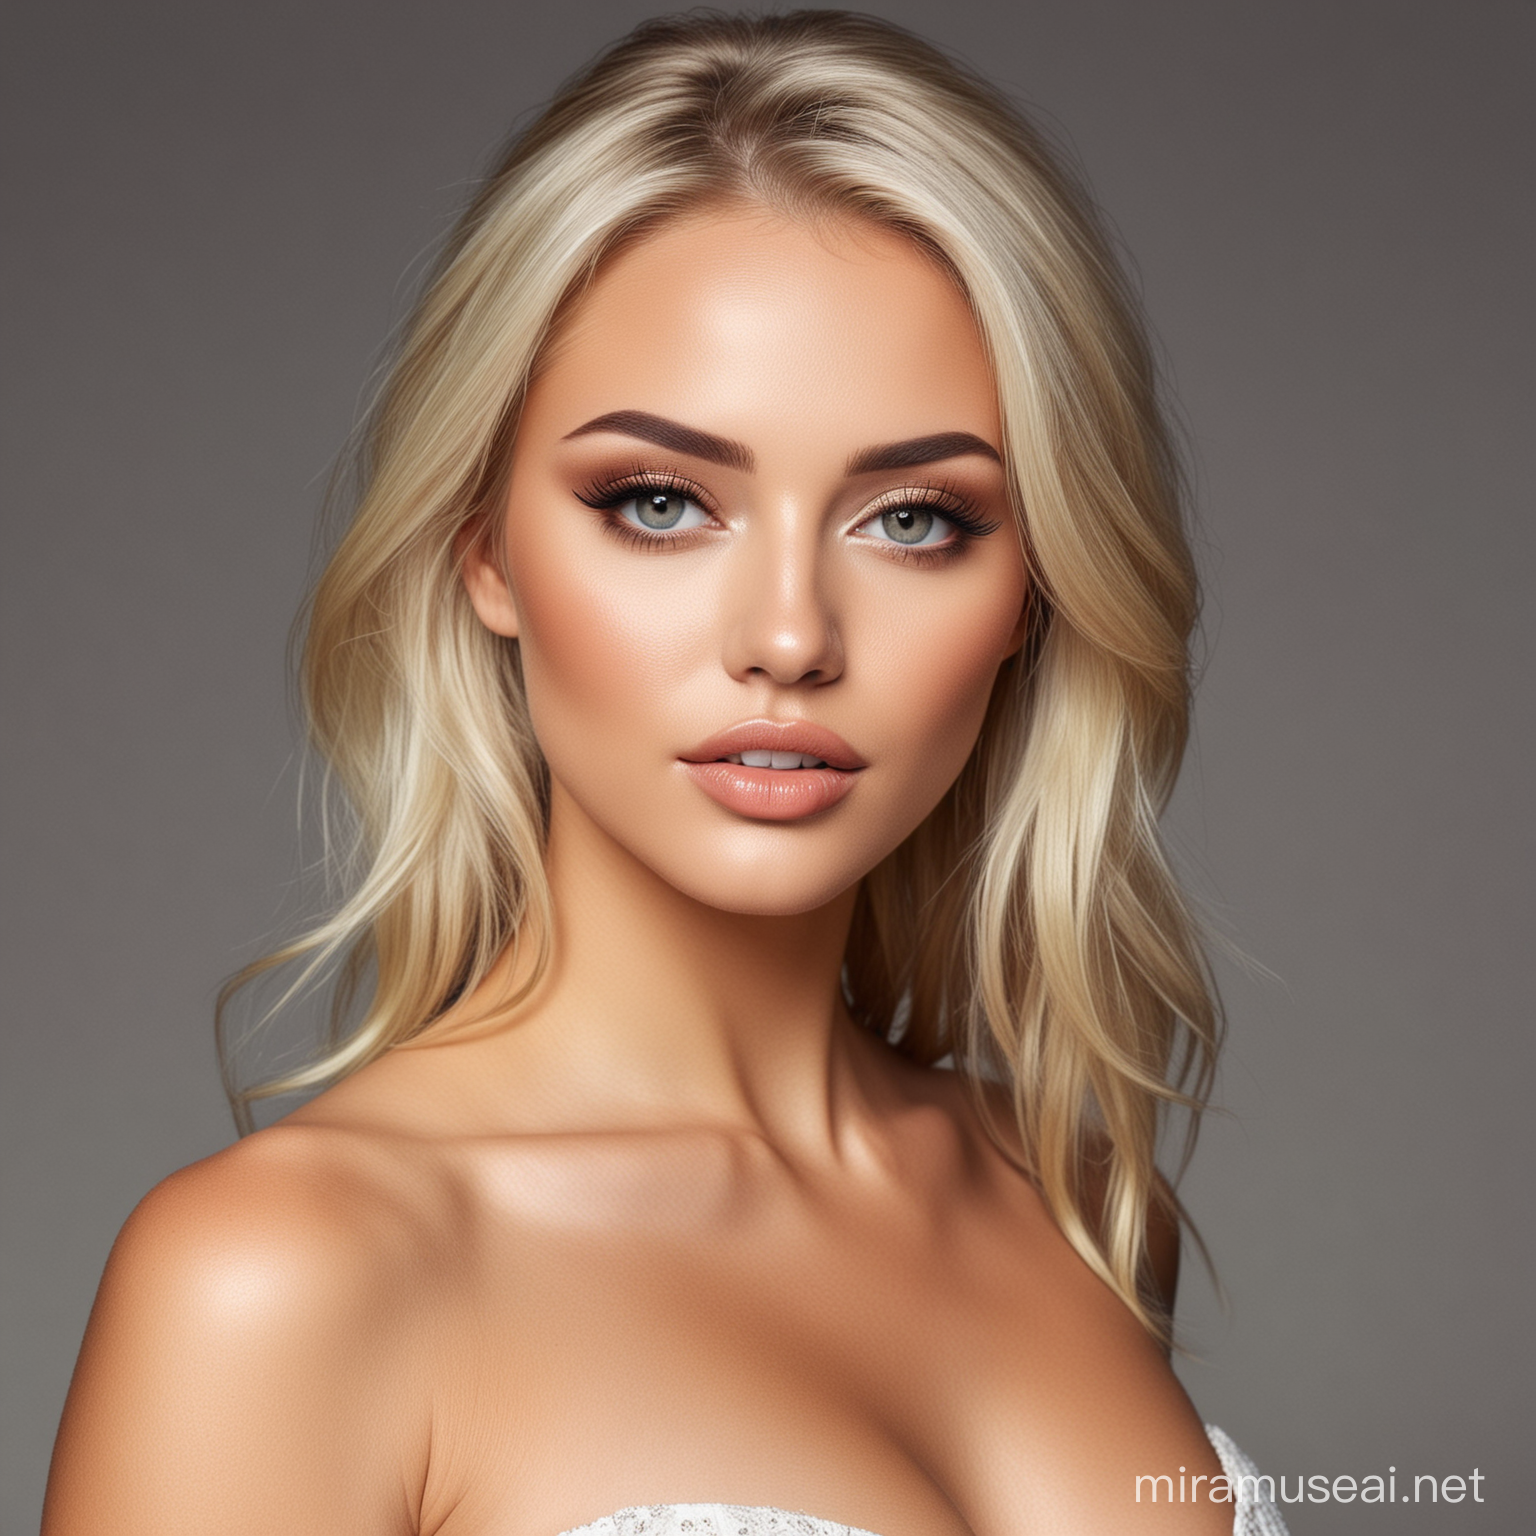 Glamorous Blonde Woman with Perfect Makeup and Stunning Physique